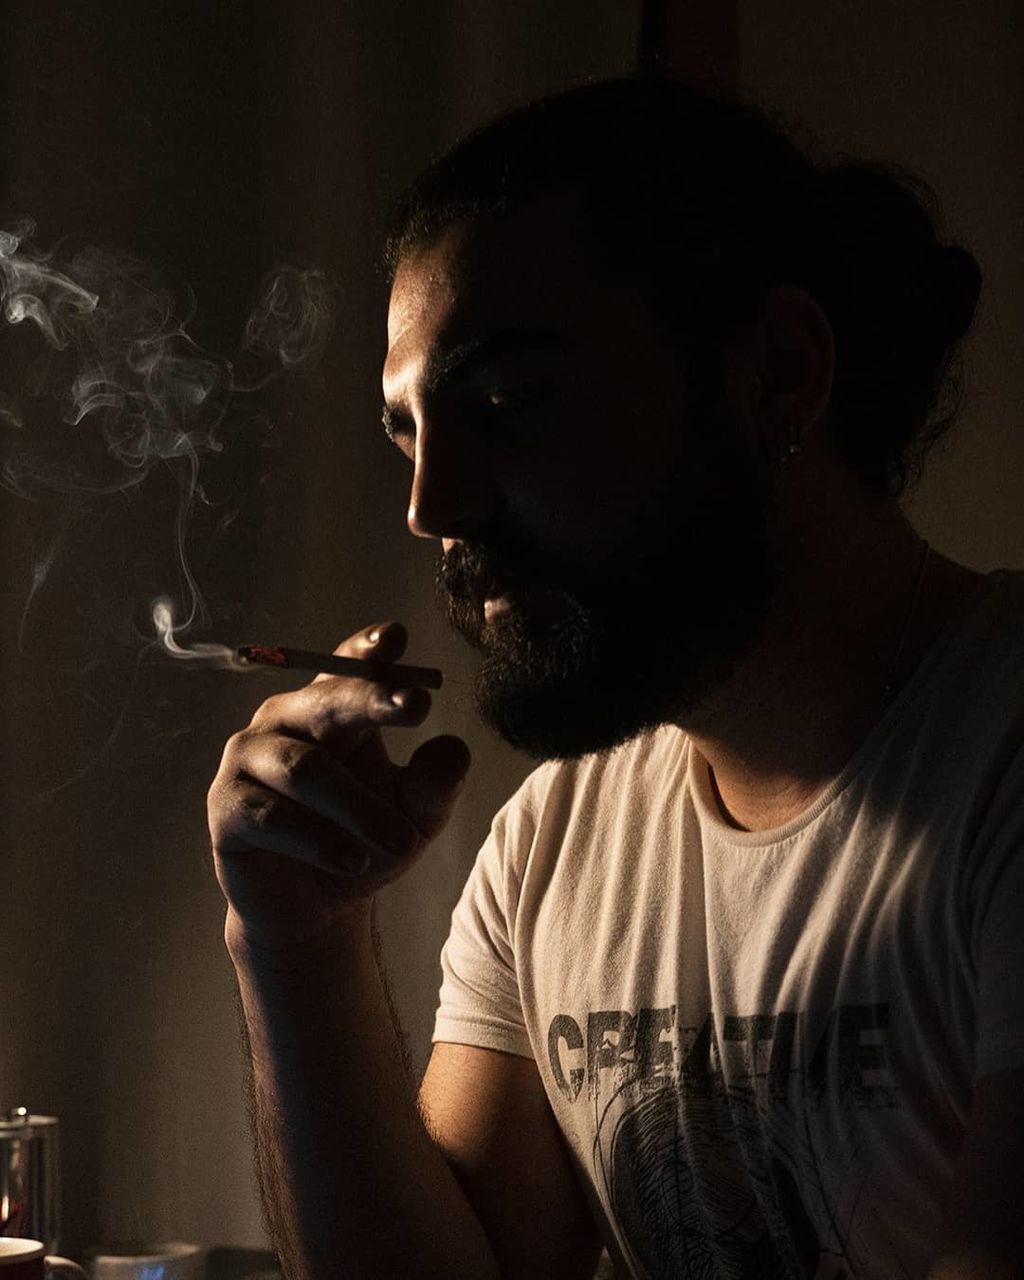 smoking, smoke, smoking issues, cigarette, one person, bad habit, tobacco products, adult, darkness, indoors, social issues, black, portrait, activity, young adult, headshot, men, lifestyles, holding, warning sign, risk, communication, person, sign, singing, waist up, light, facial hair, beard